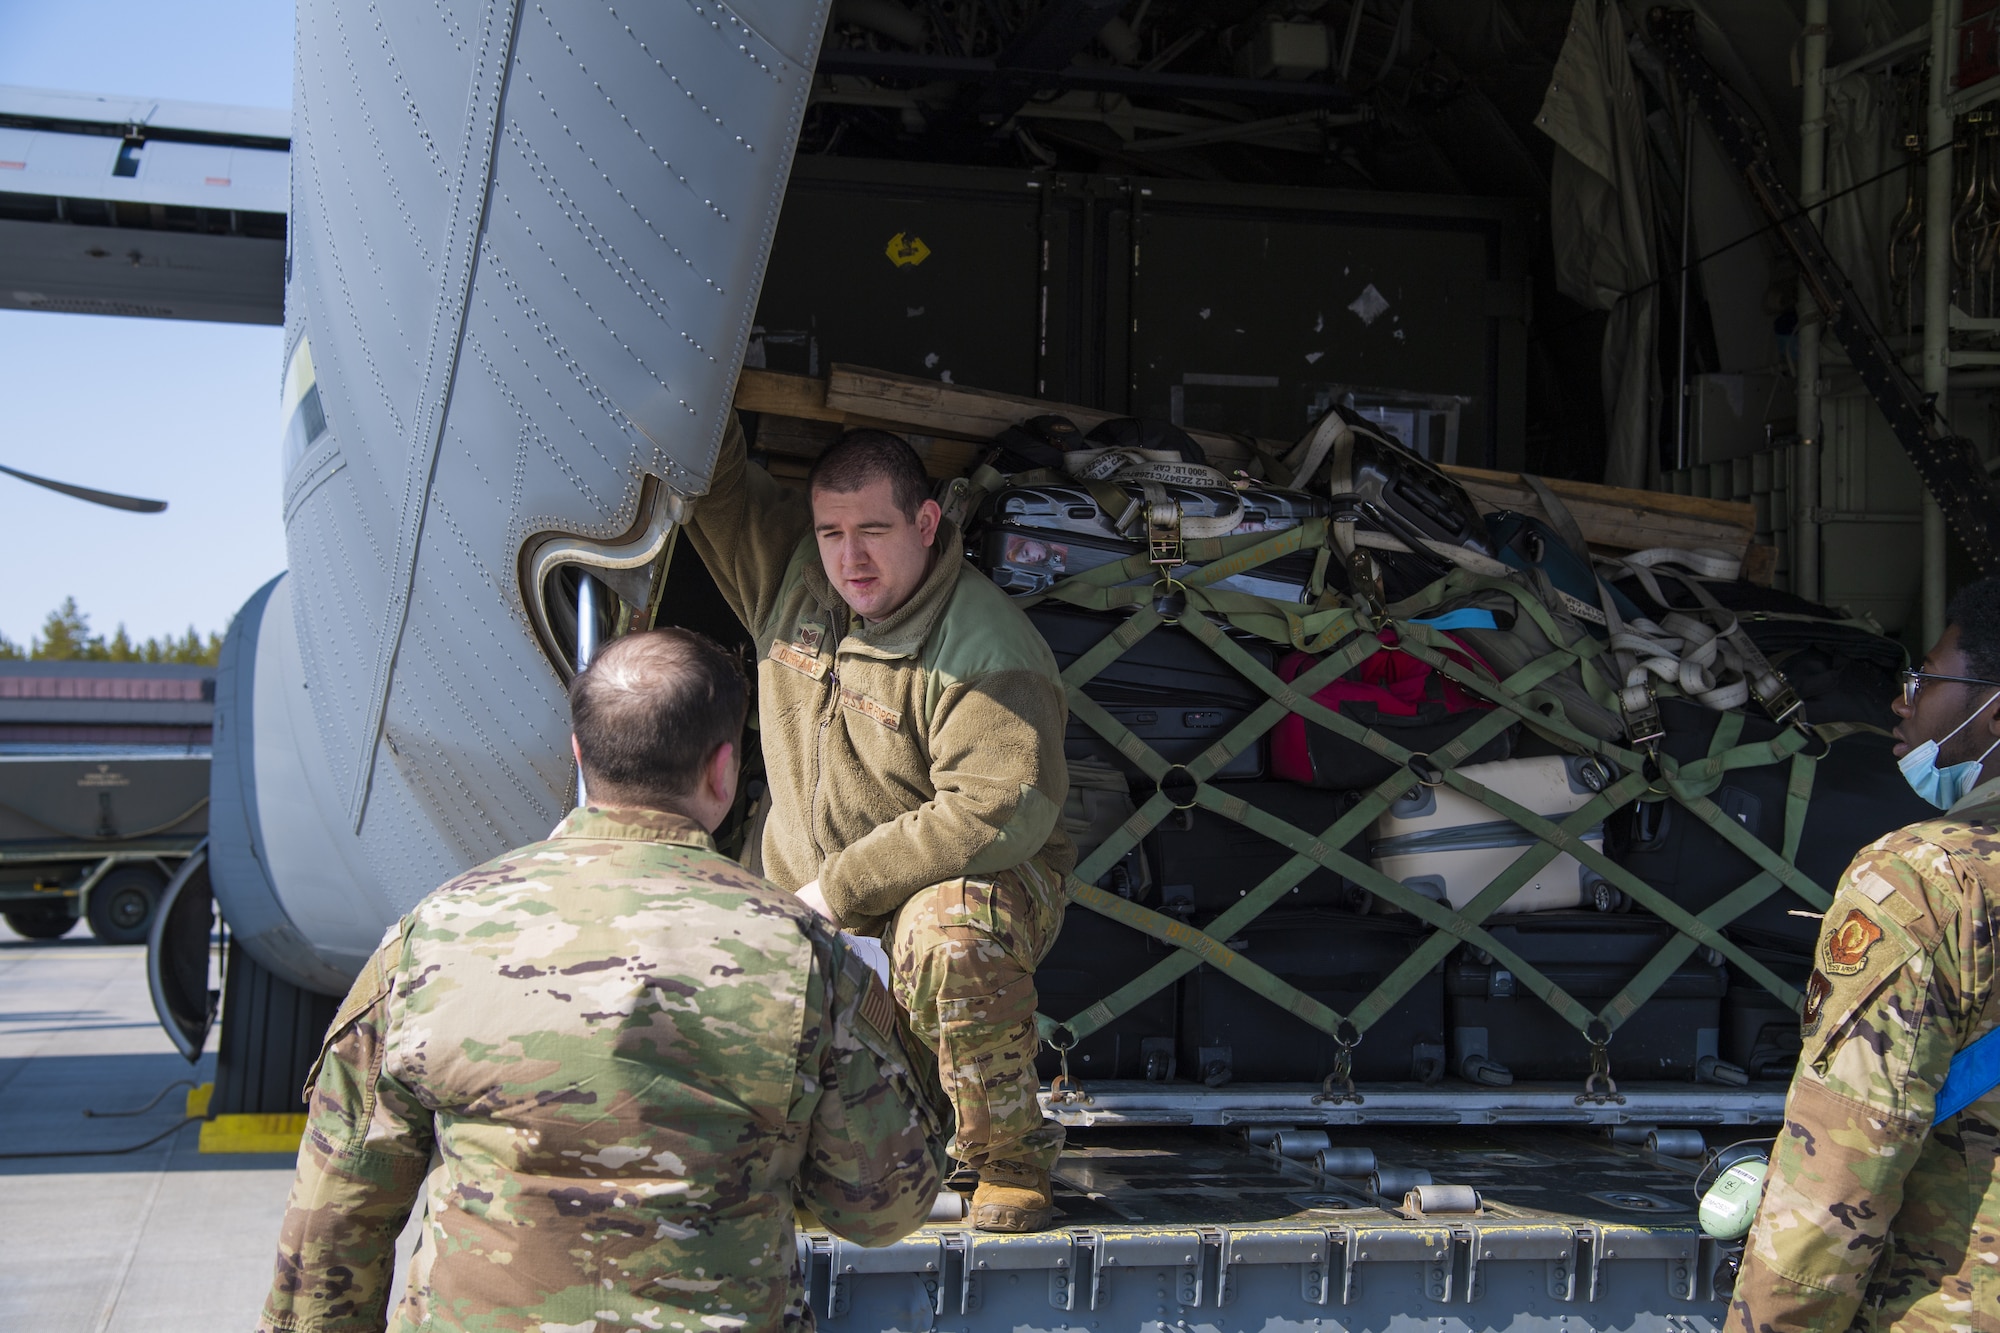 U.S. Air Force Airmen from the 52nd Fighter Wing at Spangdahlem Air Base, Germany, unload cargo from a USAF C-130 Hercules aircraft at Kallax Air Base, Sweden, May 14, 2021. The aircraft carried Airmen, personal luggage and military cargo in preparation for support of the Arctic Challenge Exercise 2021. (U.S. Air Force photo by Senior Airman Ali Stewart)